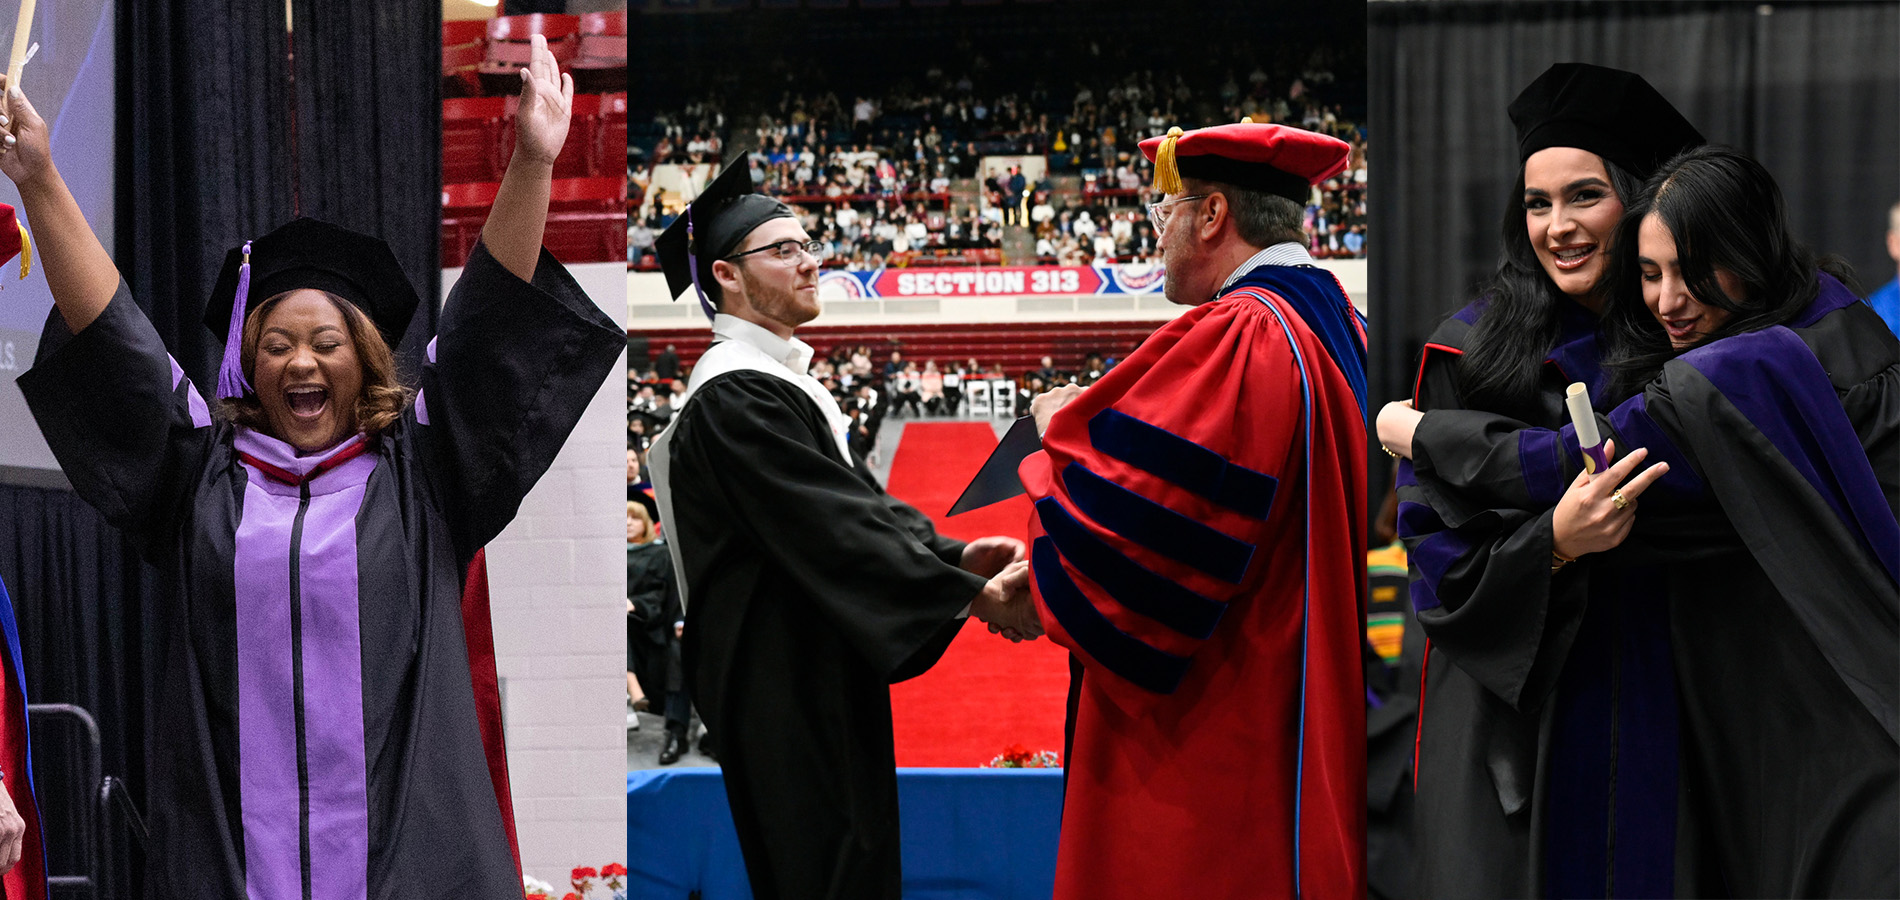 Photos of three graduates during commencement ceremonies inside of Calihan Hall wearing robes and caps.